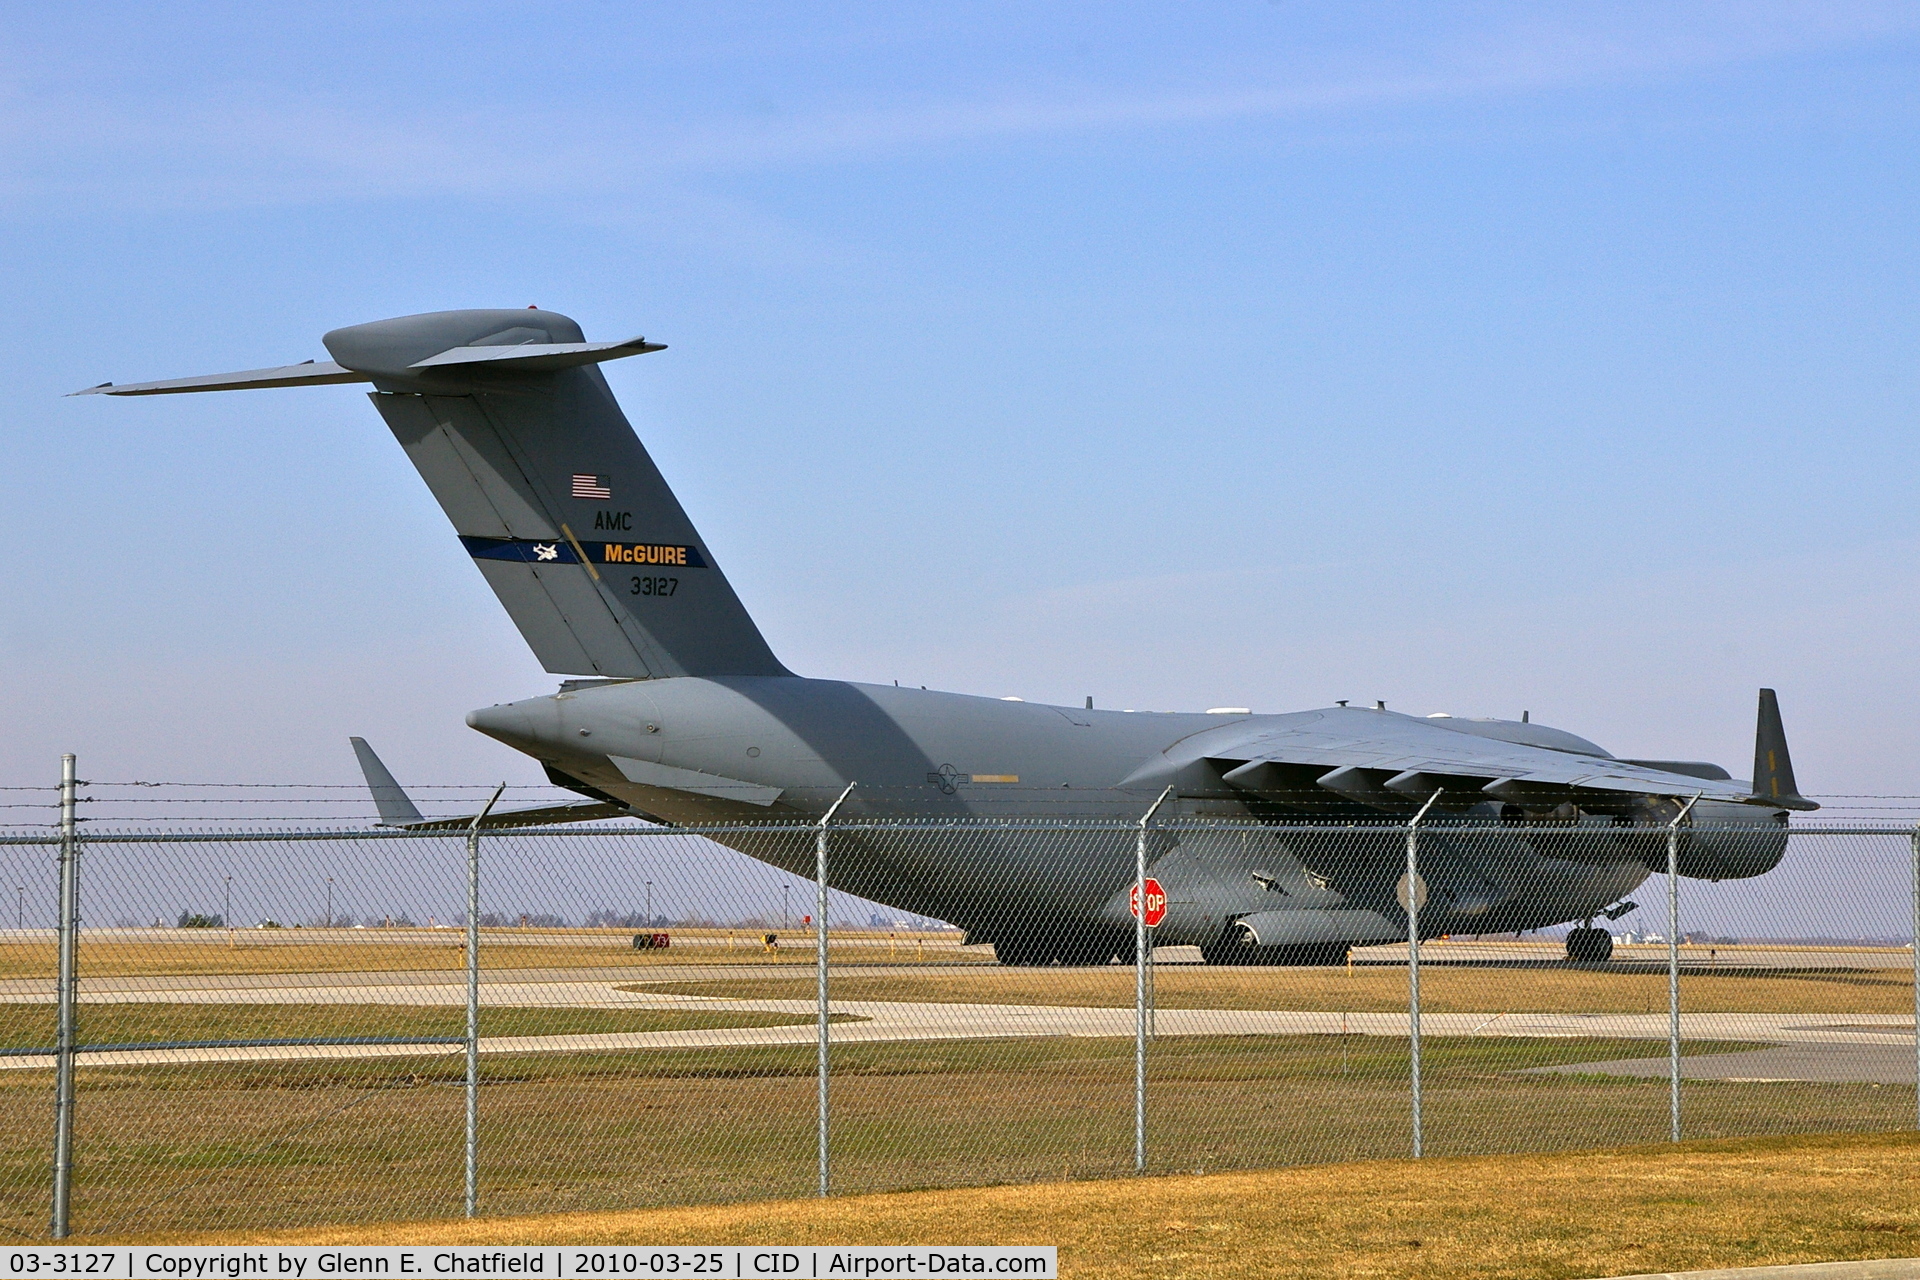 03-3127, 2003 Boeing C-17A Globemaster III C/N P-127, Presidential support aircraft parked on taxiway D